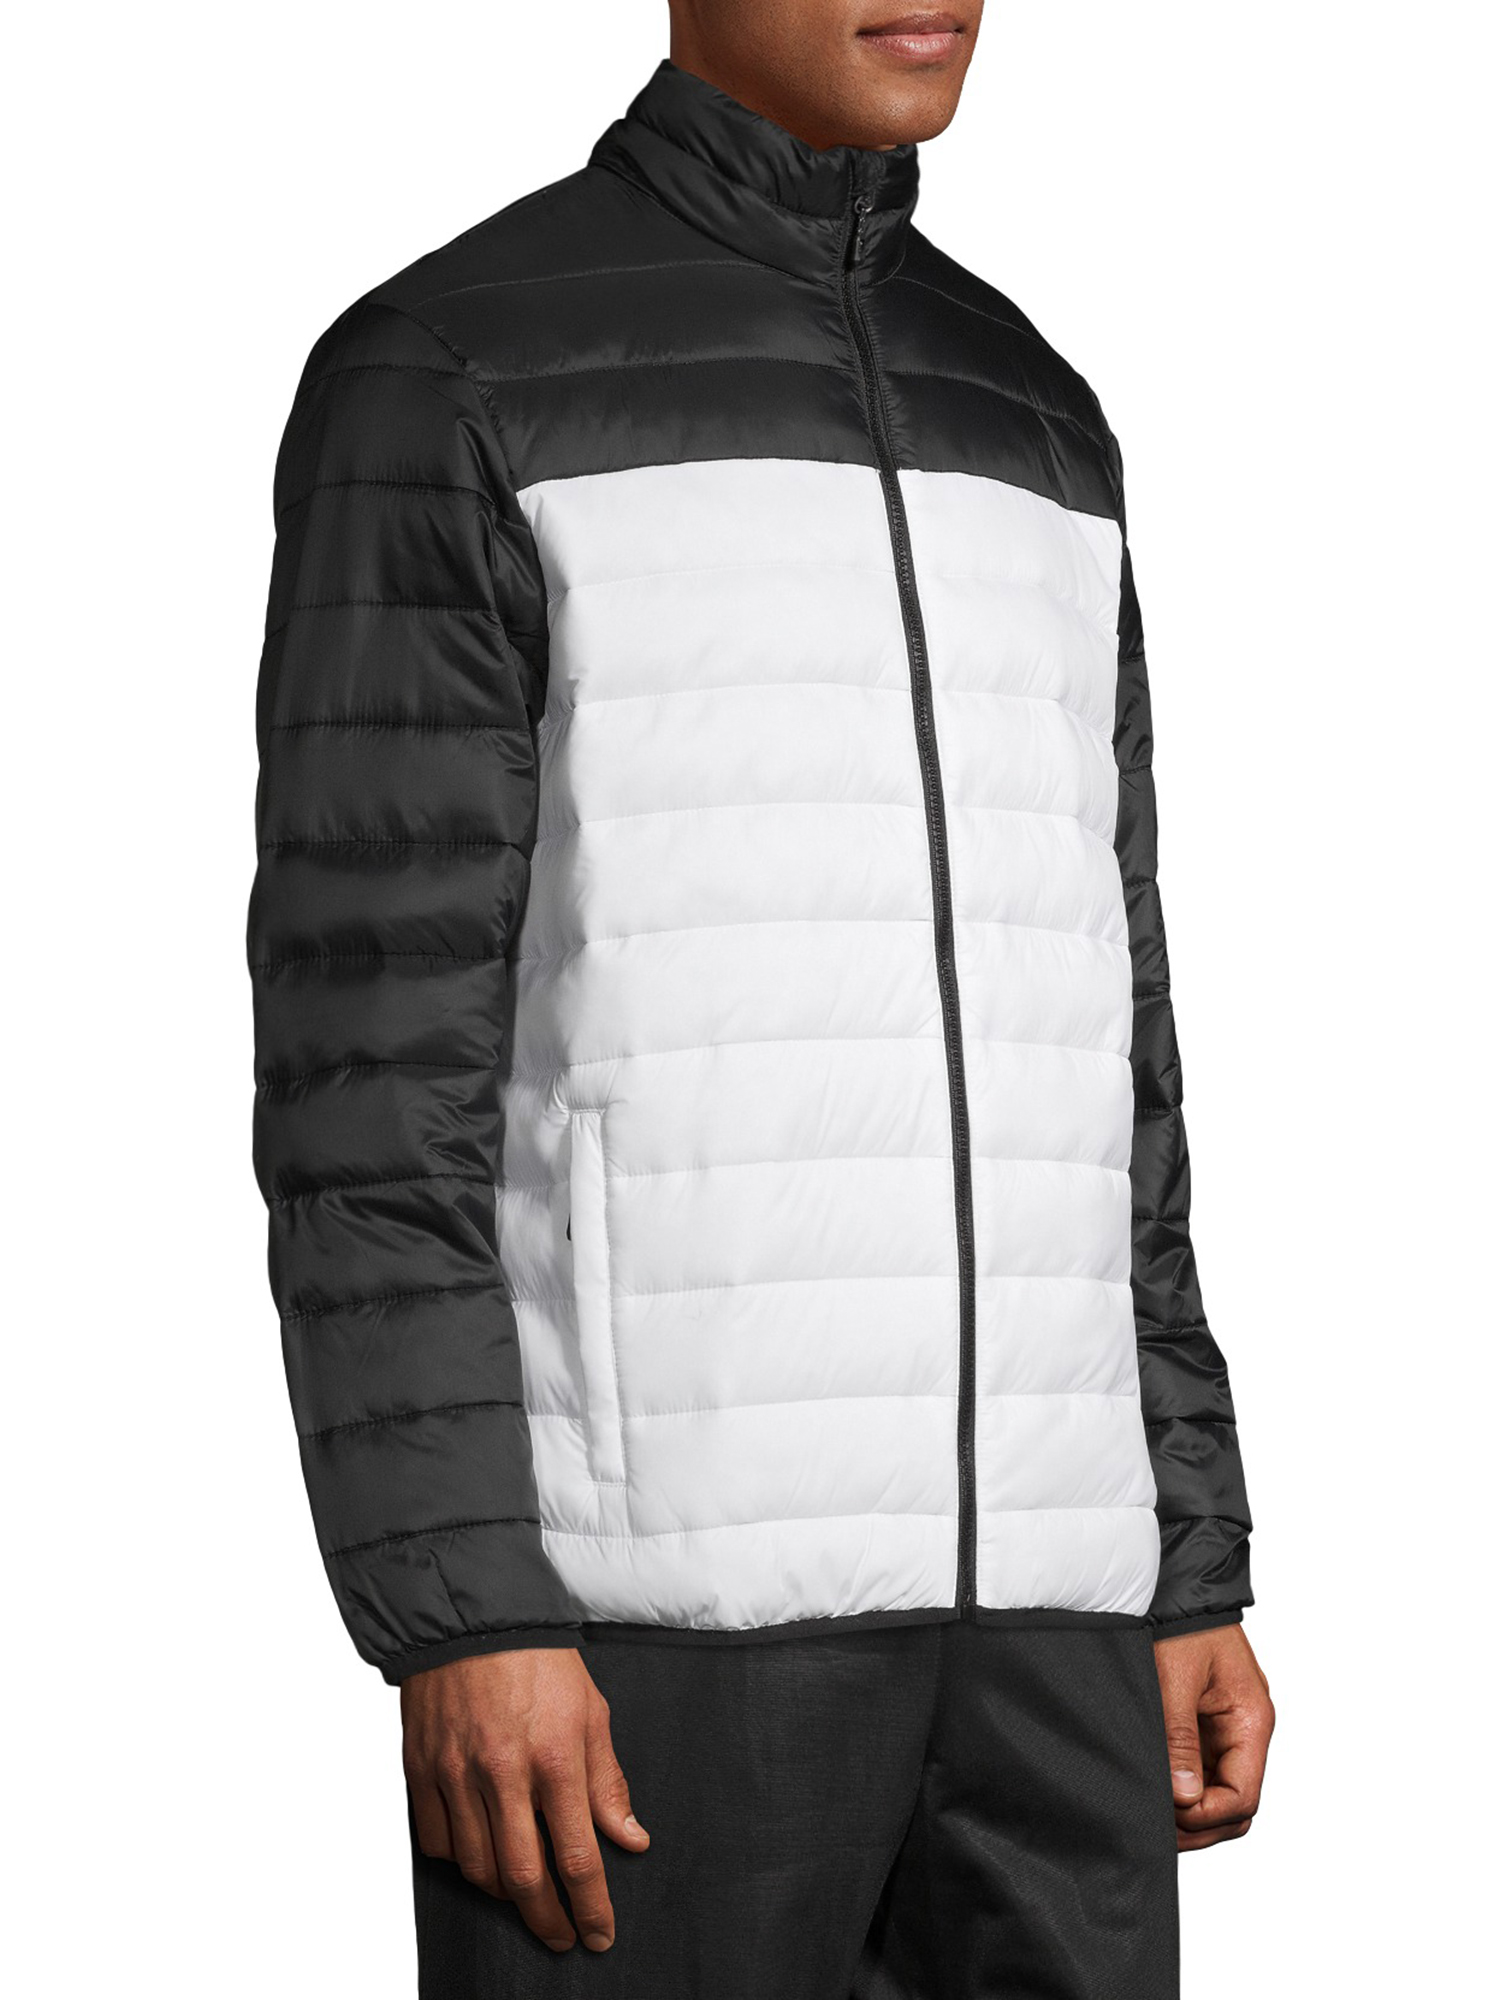 SwissTech Men's and Big Men's Puffer Jacket, Up to Size 5XL - image 5 of 6